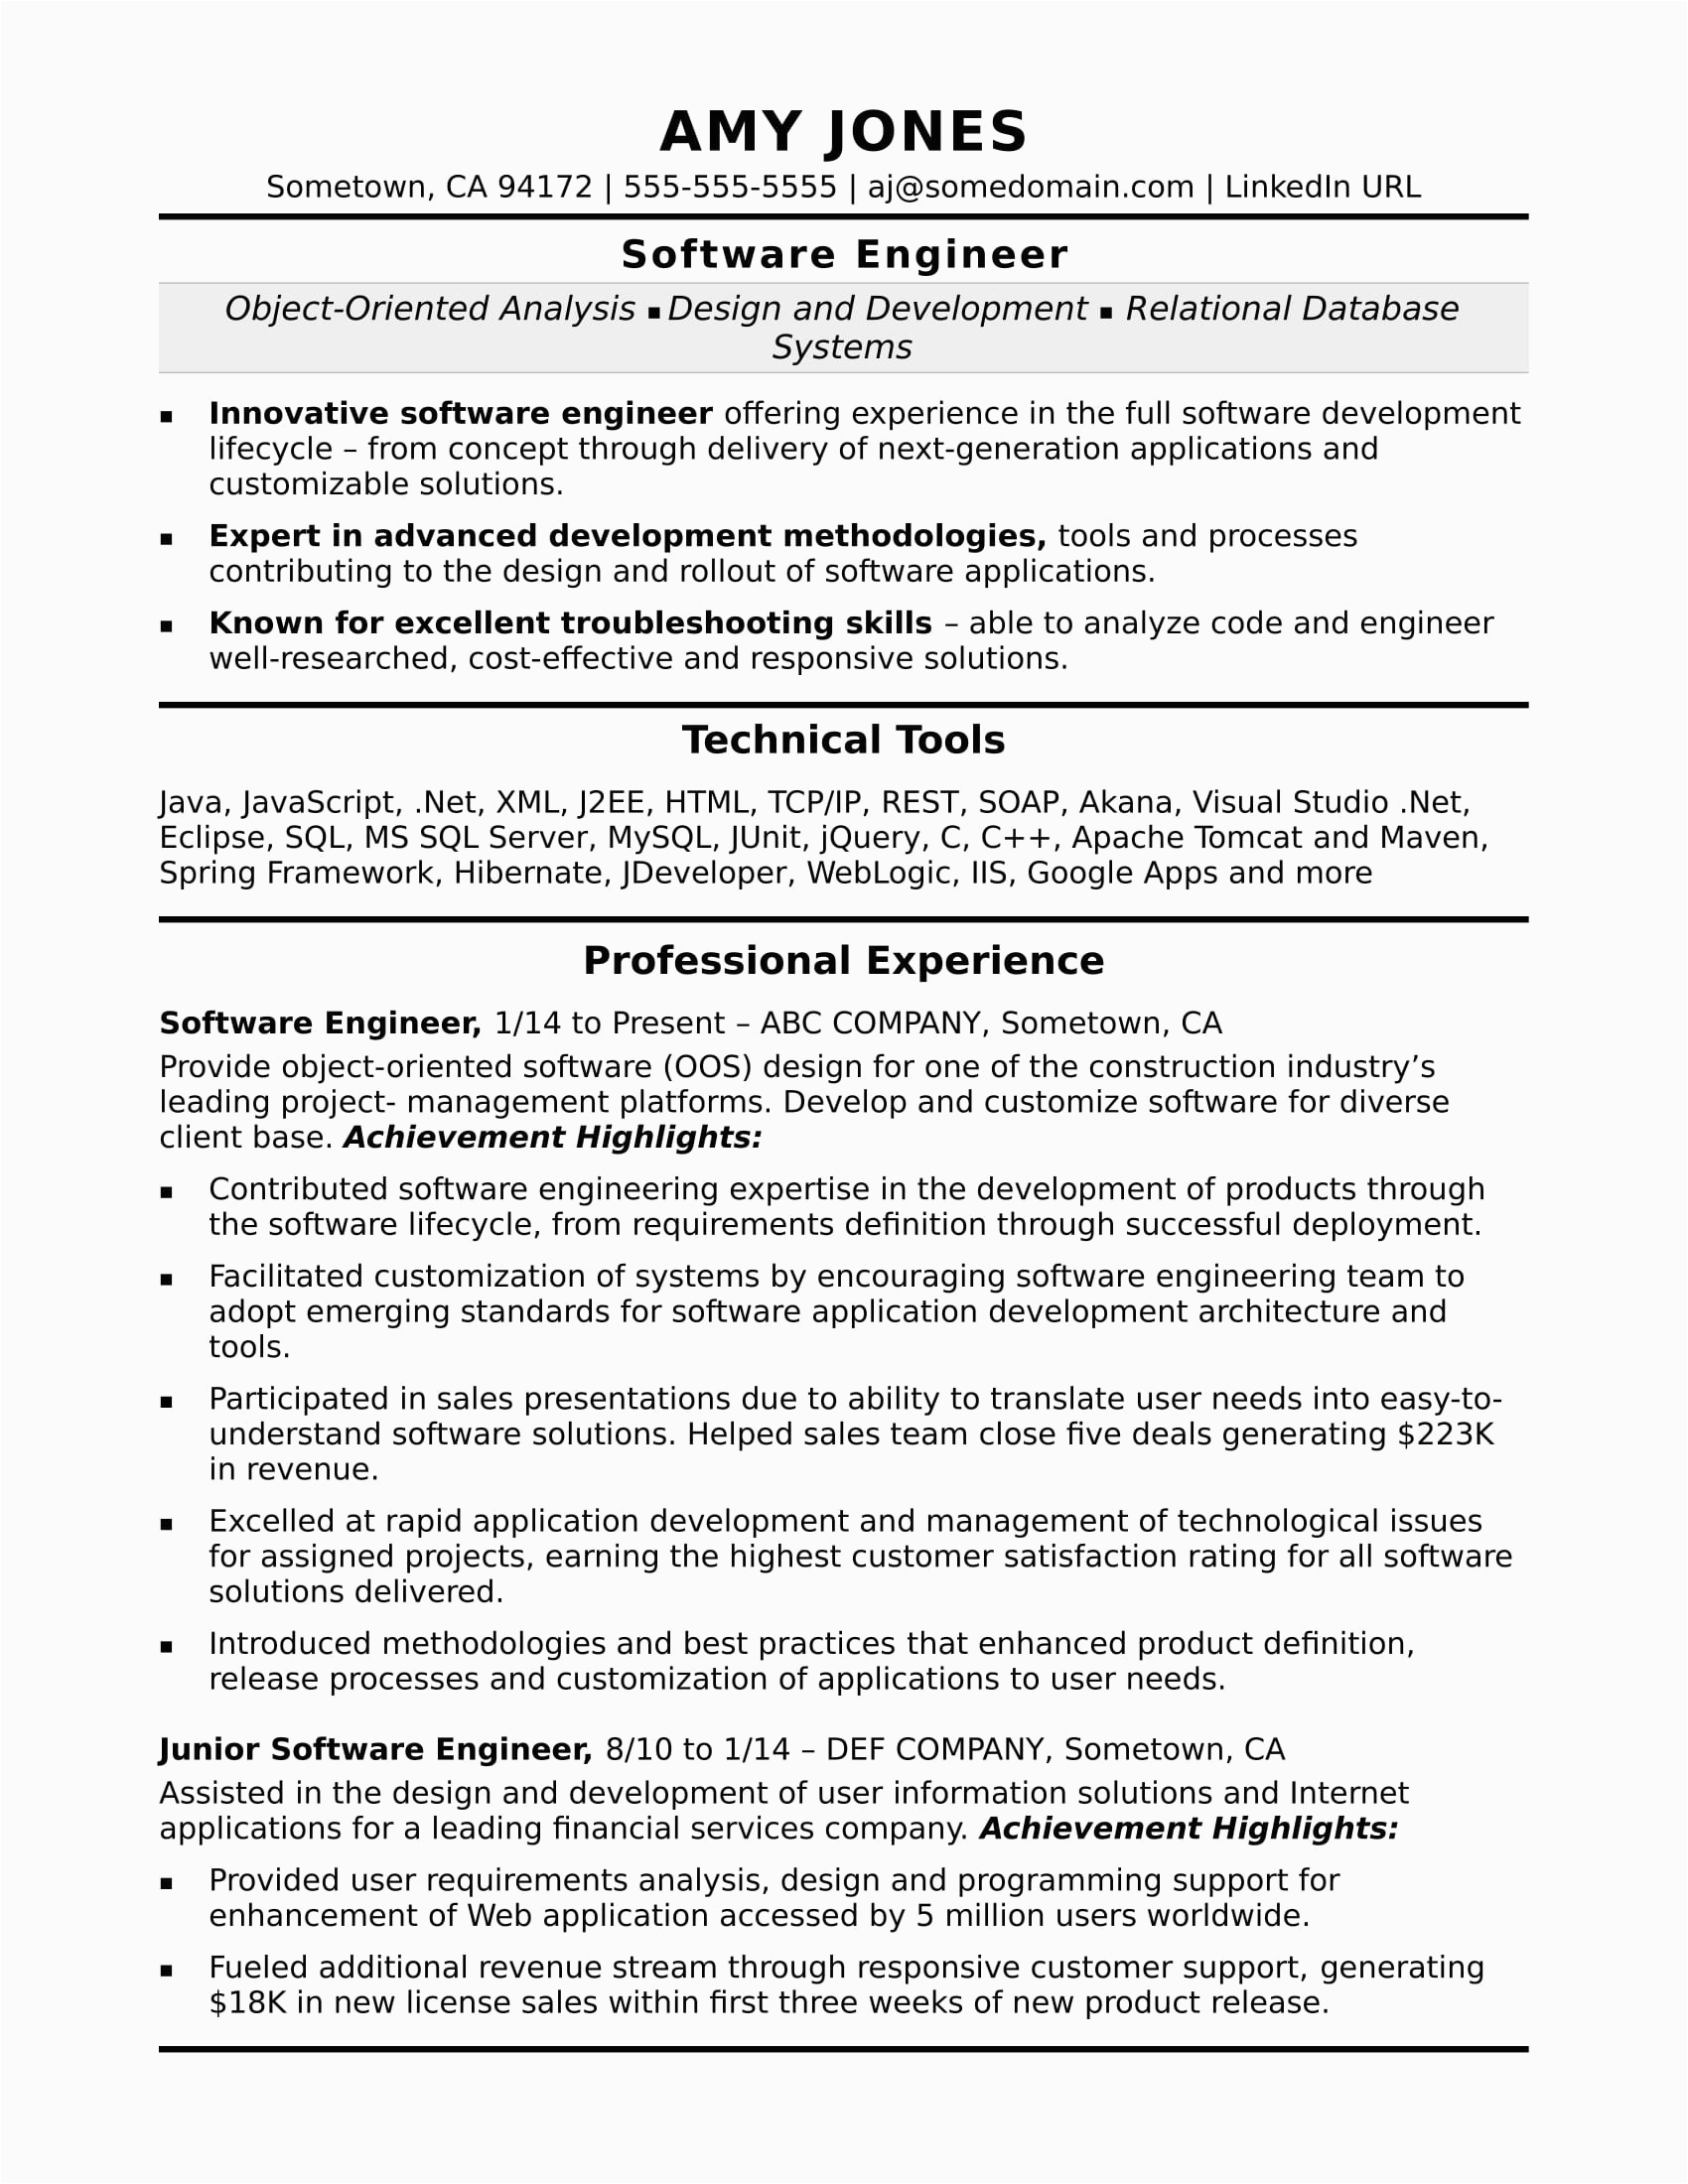 Sample Resume W Experience is One Job for 14 Years Junior software Developer Resume